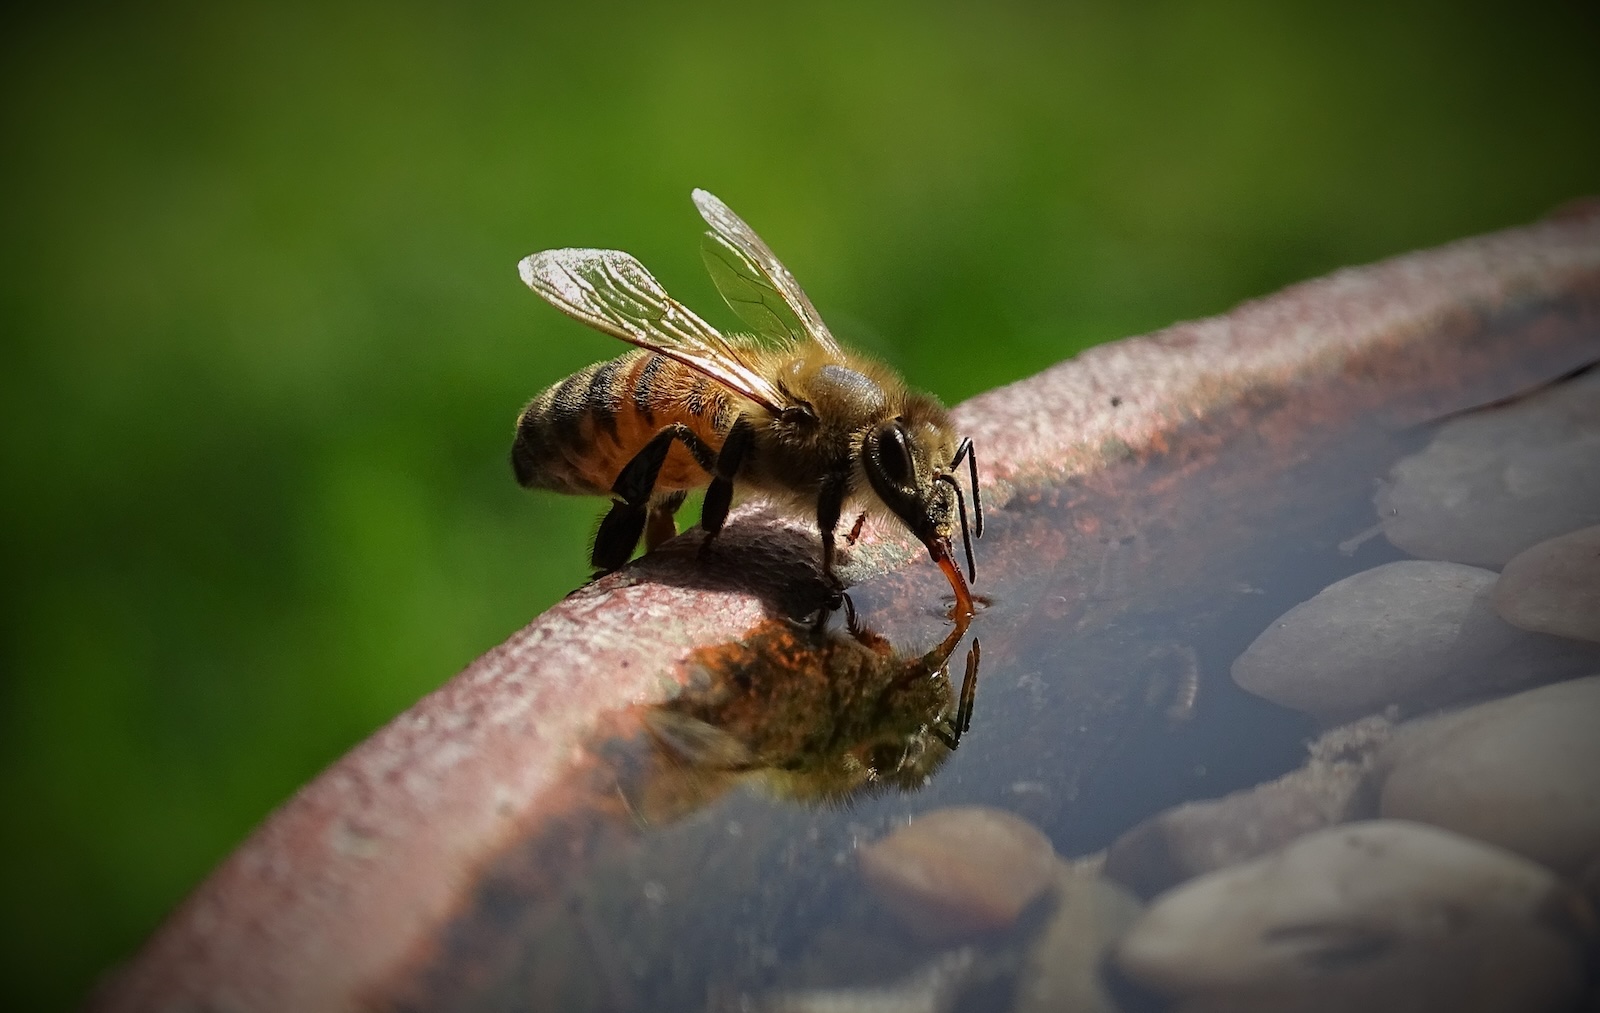 A thirsty bee taking a drink at a bird bath. Photo 193211975 © James Twedt | Dreamstime